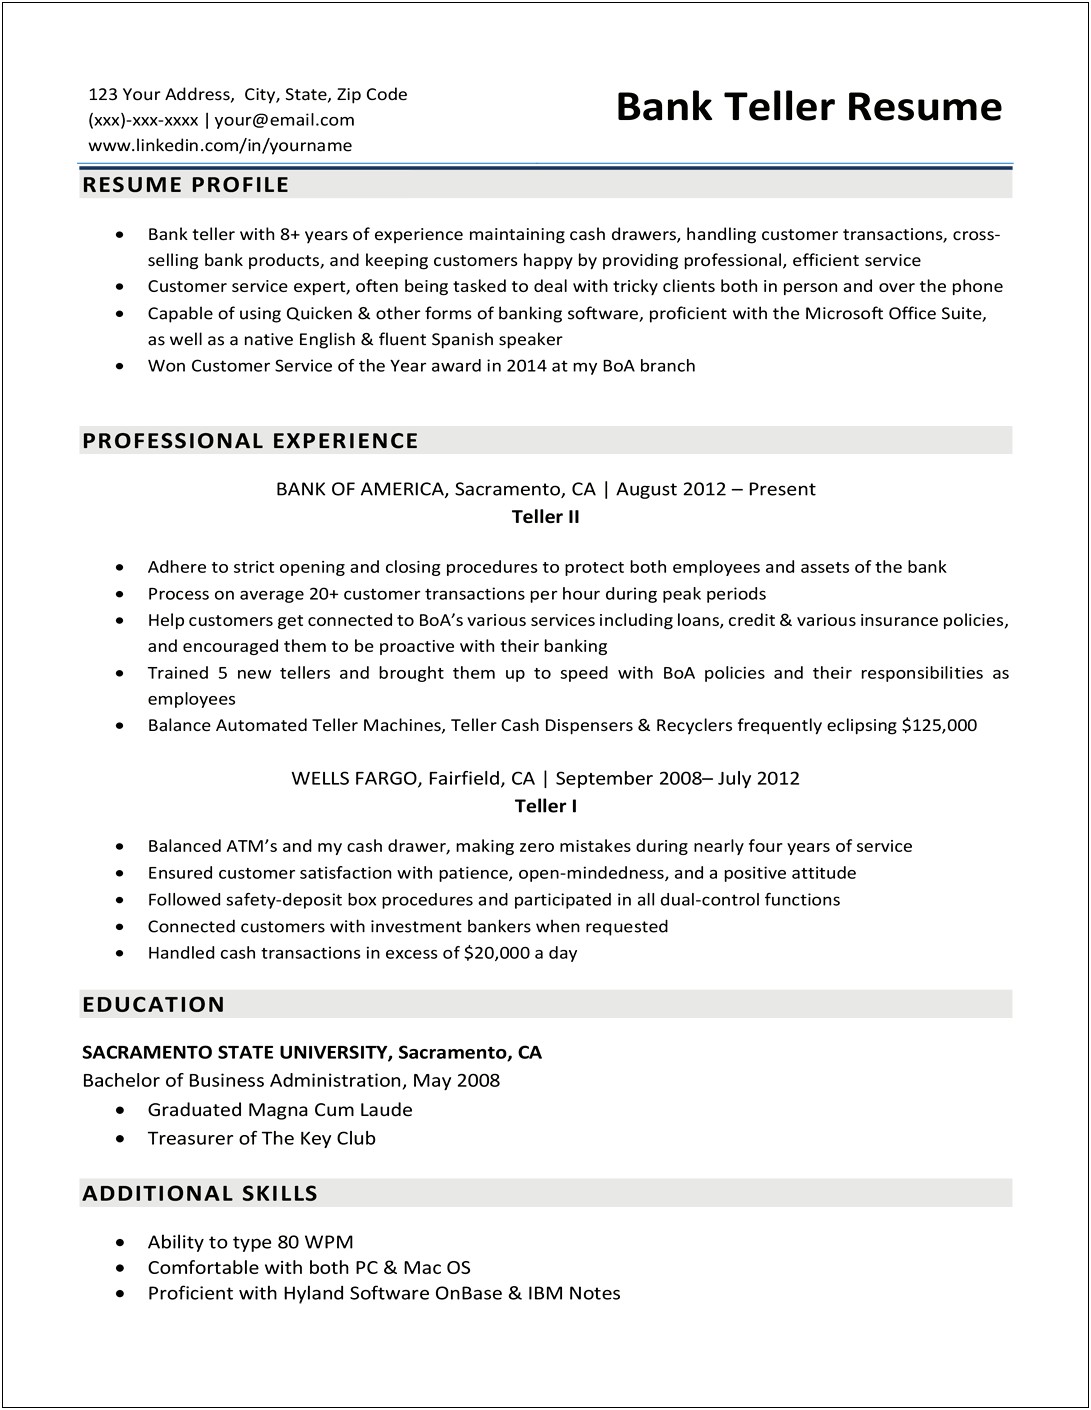 Resume Objective Of A Bank Teller